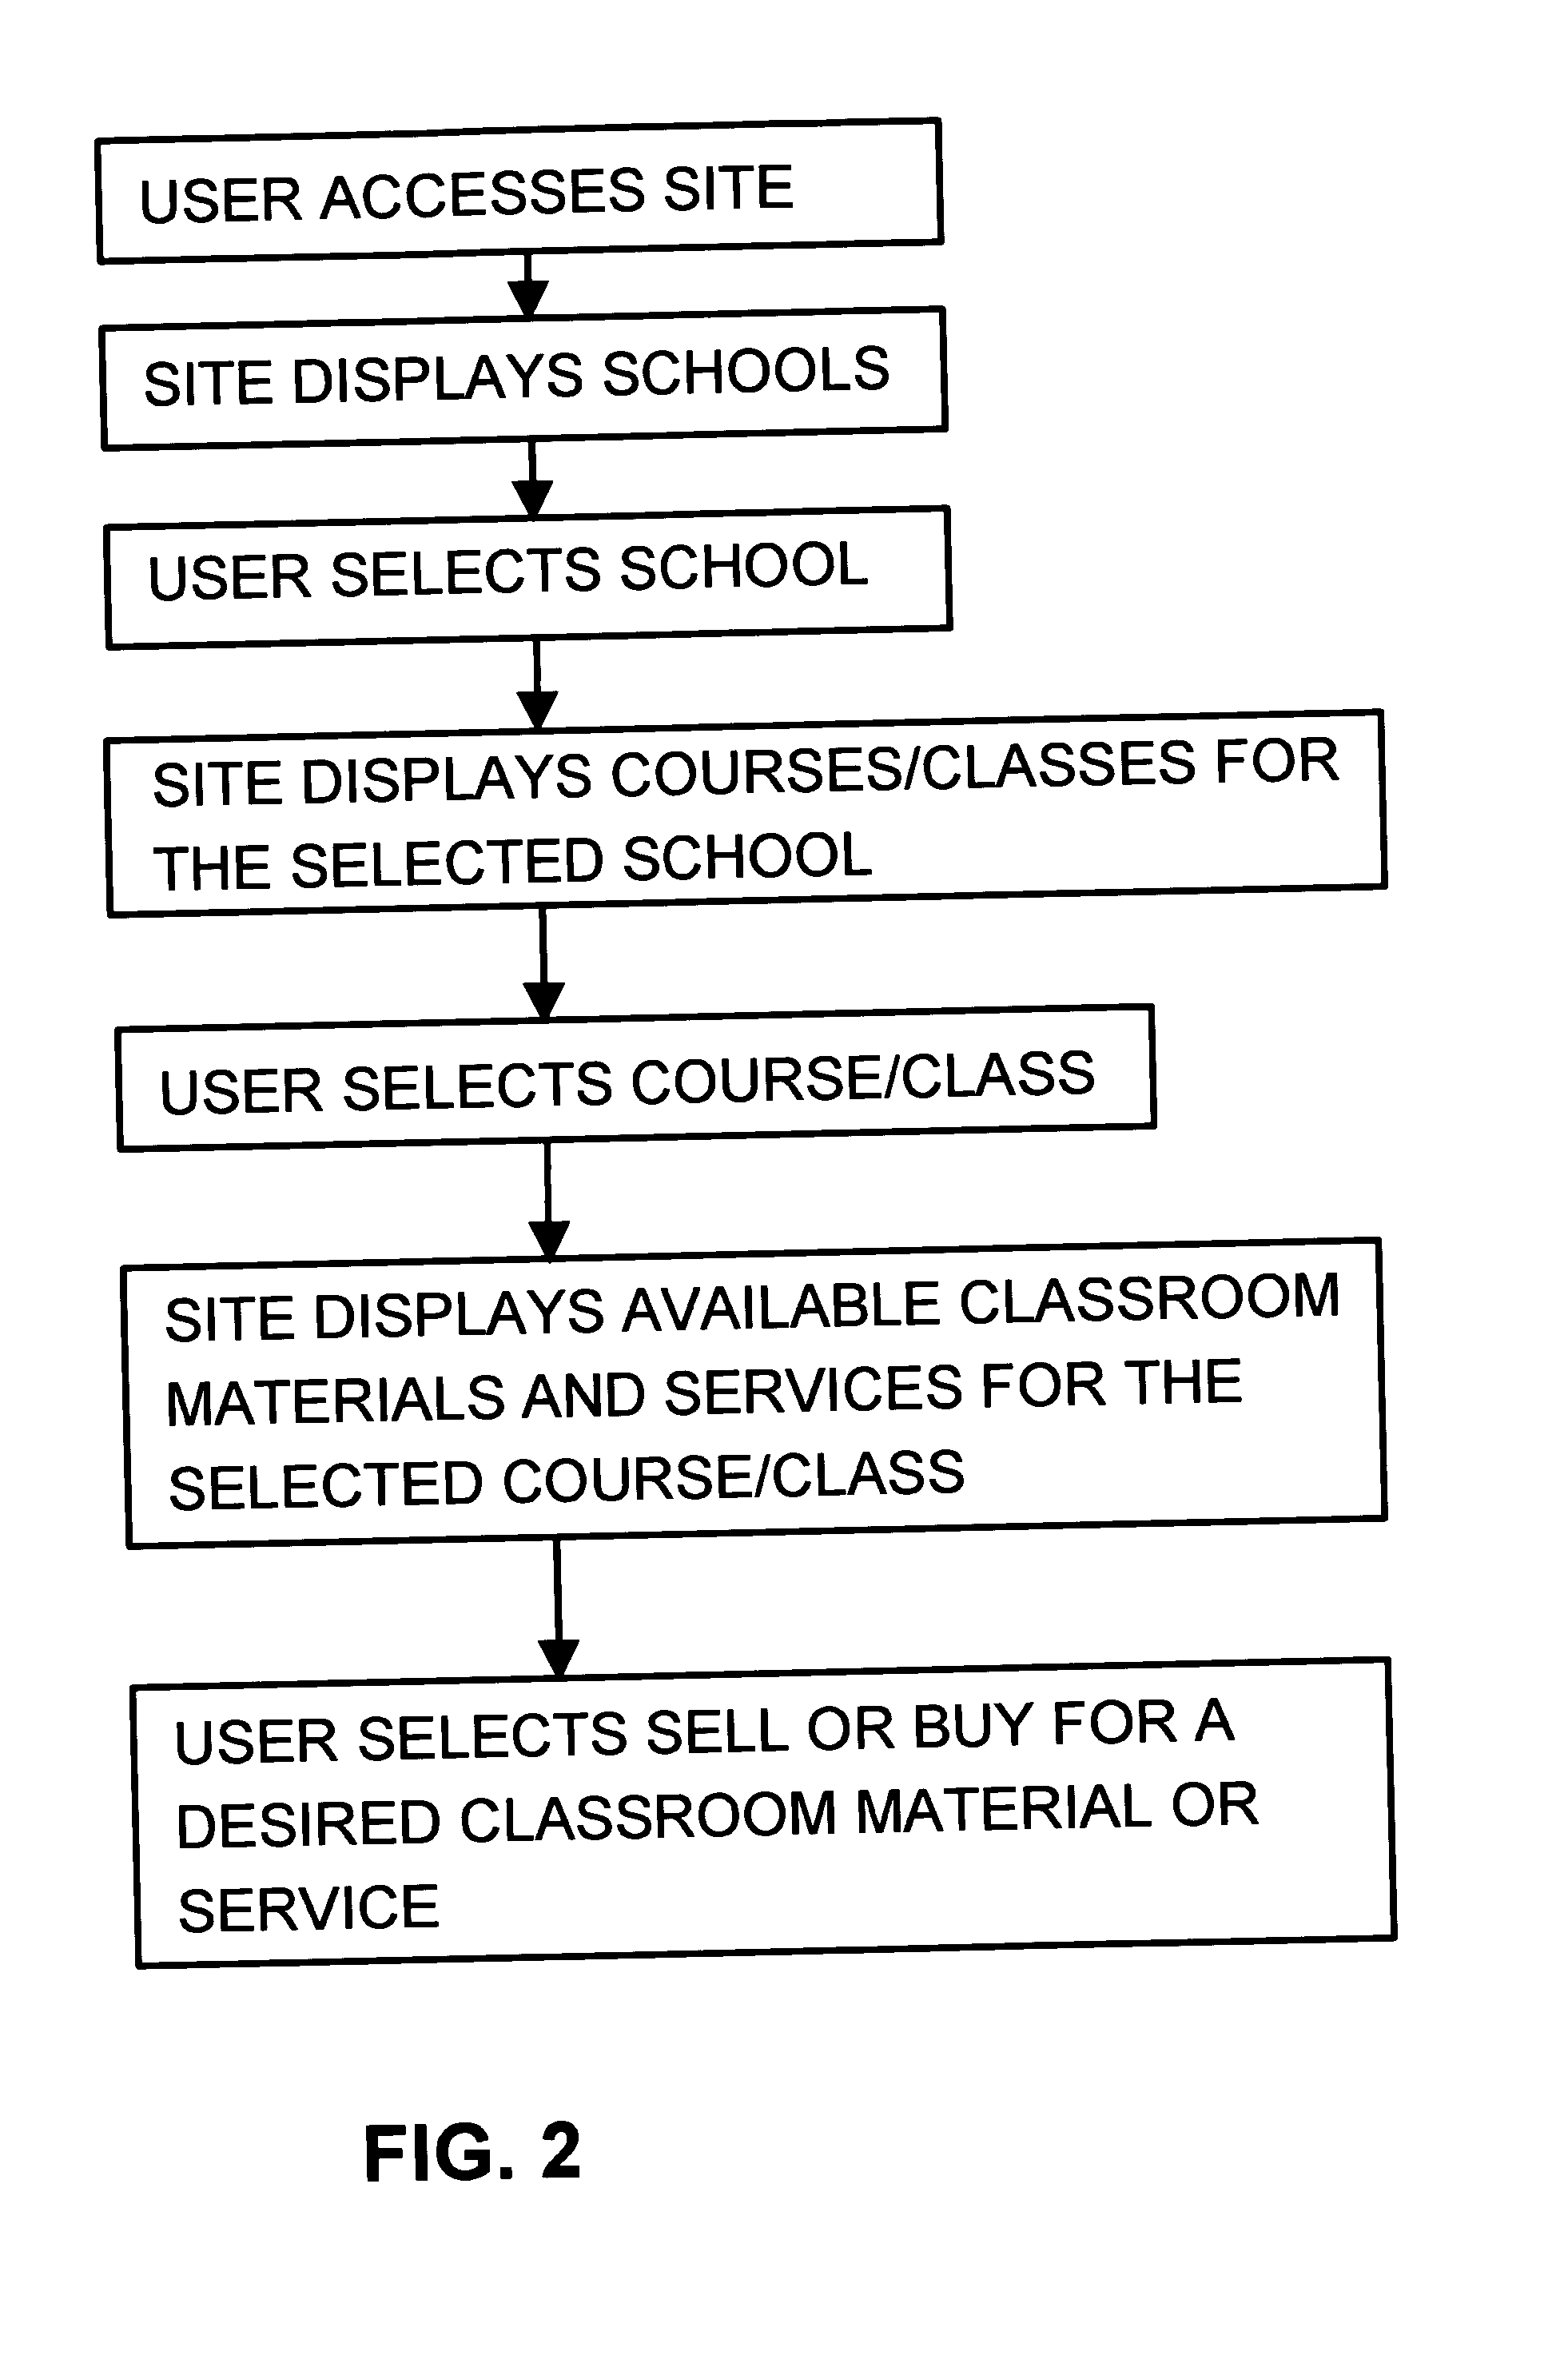 Method for advertising for sale classroom materials and services